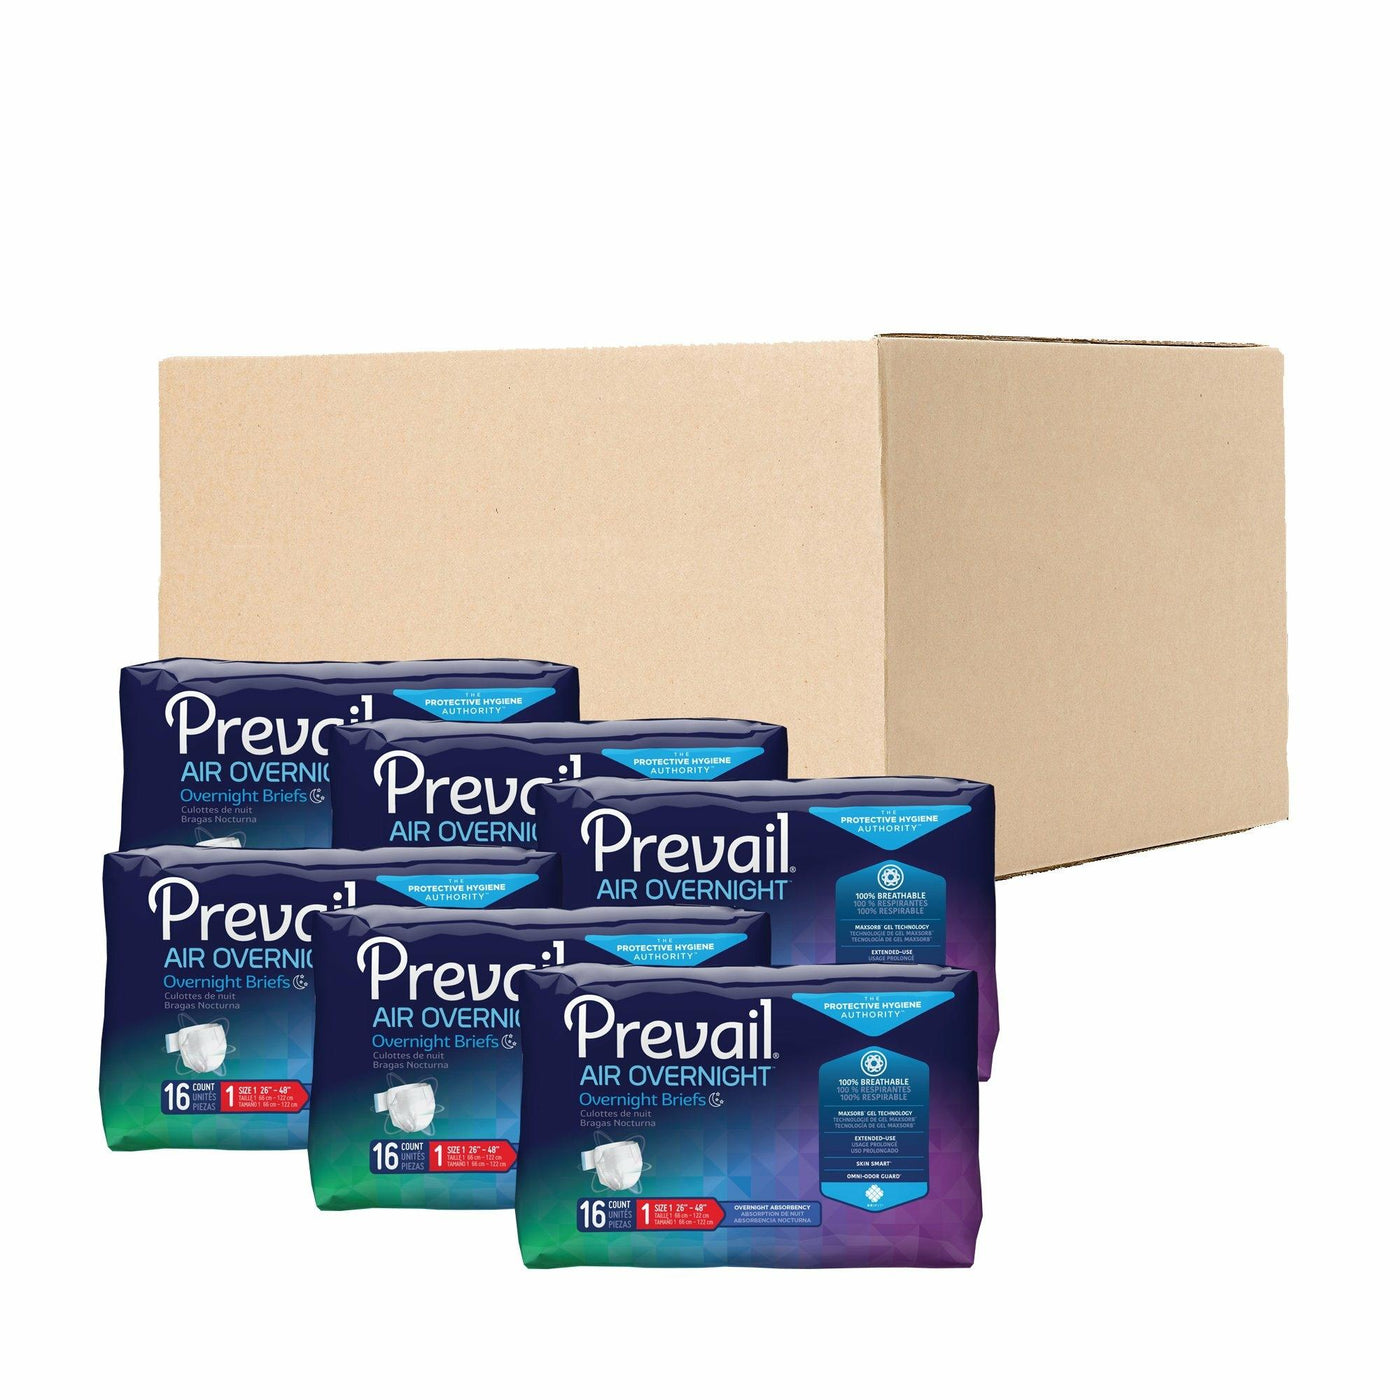 Prevail Men's Daily Underwear Maximum Absorbency Large- 18 count